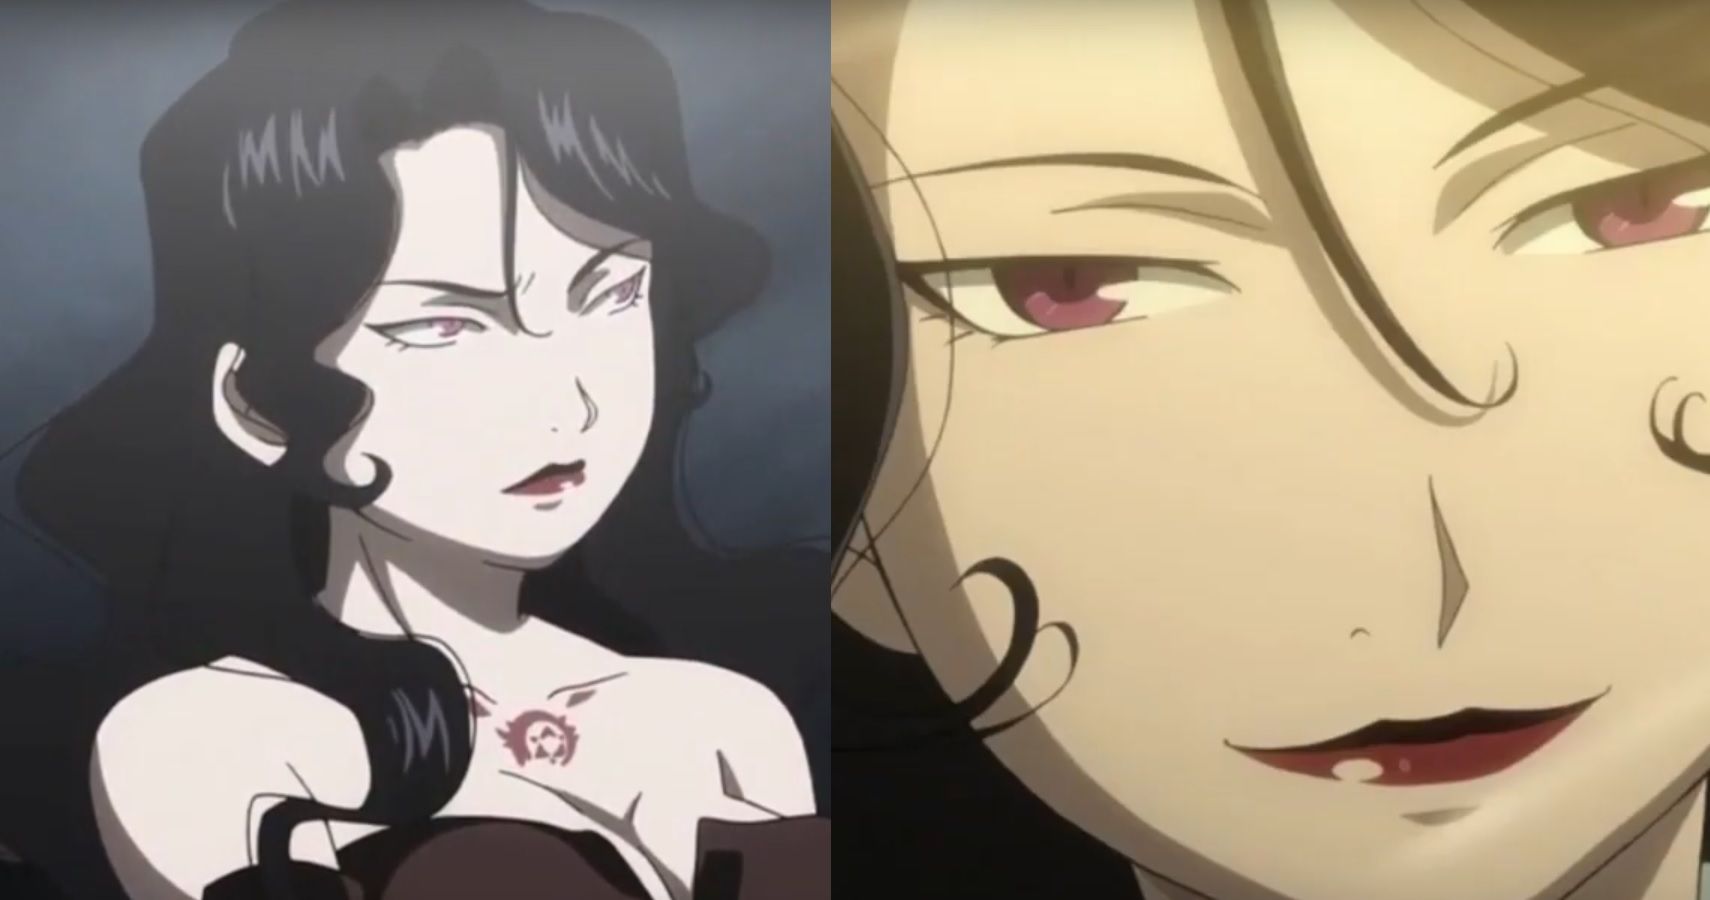 Fullmetal Alchemist: 10 Cool Facts You Didn't Know About Lust